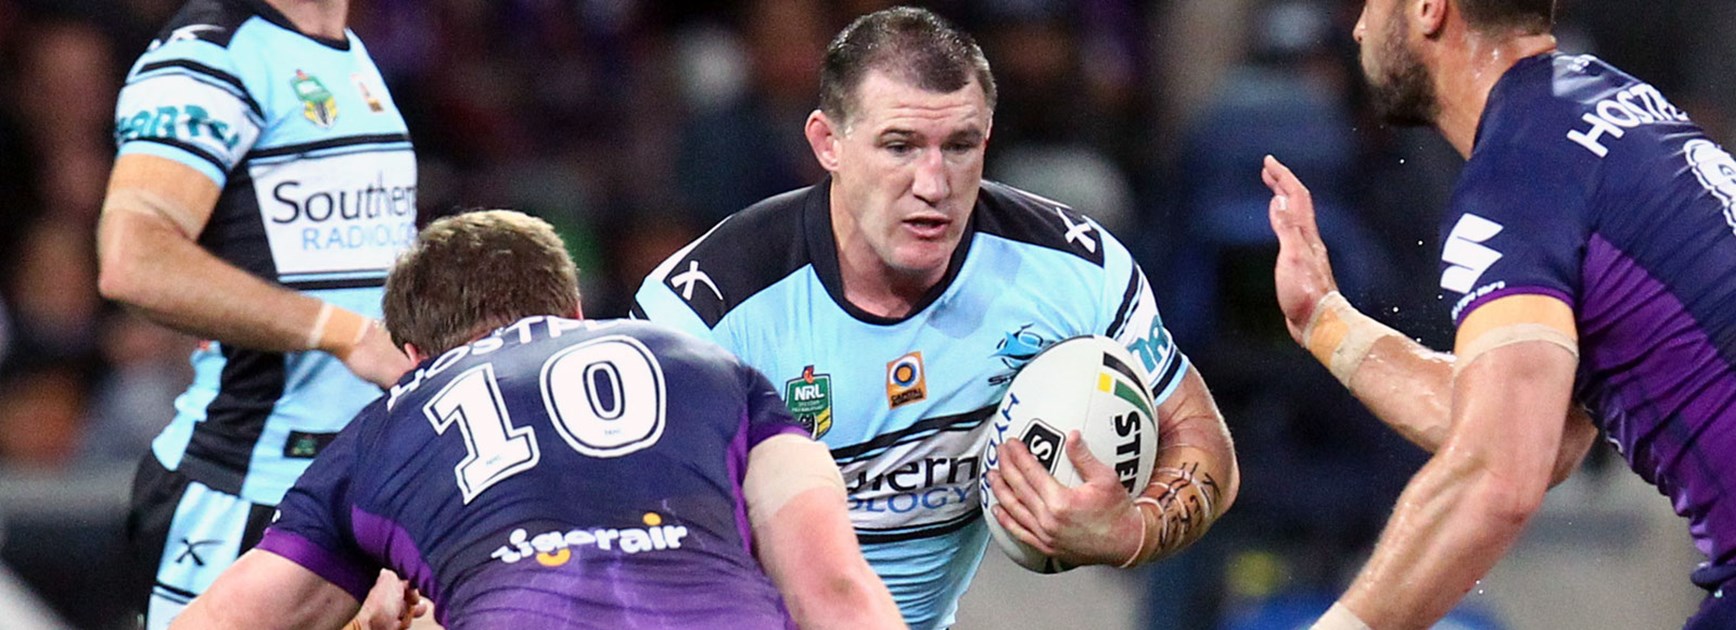 Sharks captain Paul Gallen against the Storm in Round 26.